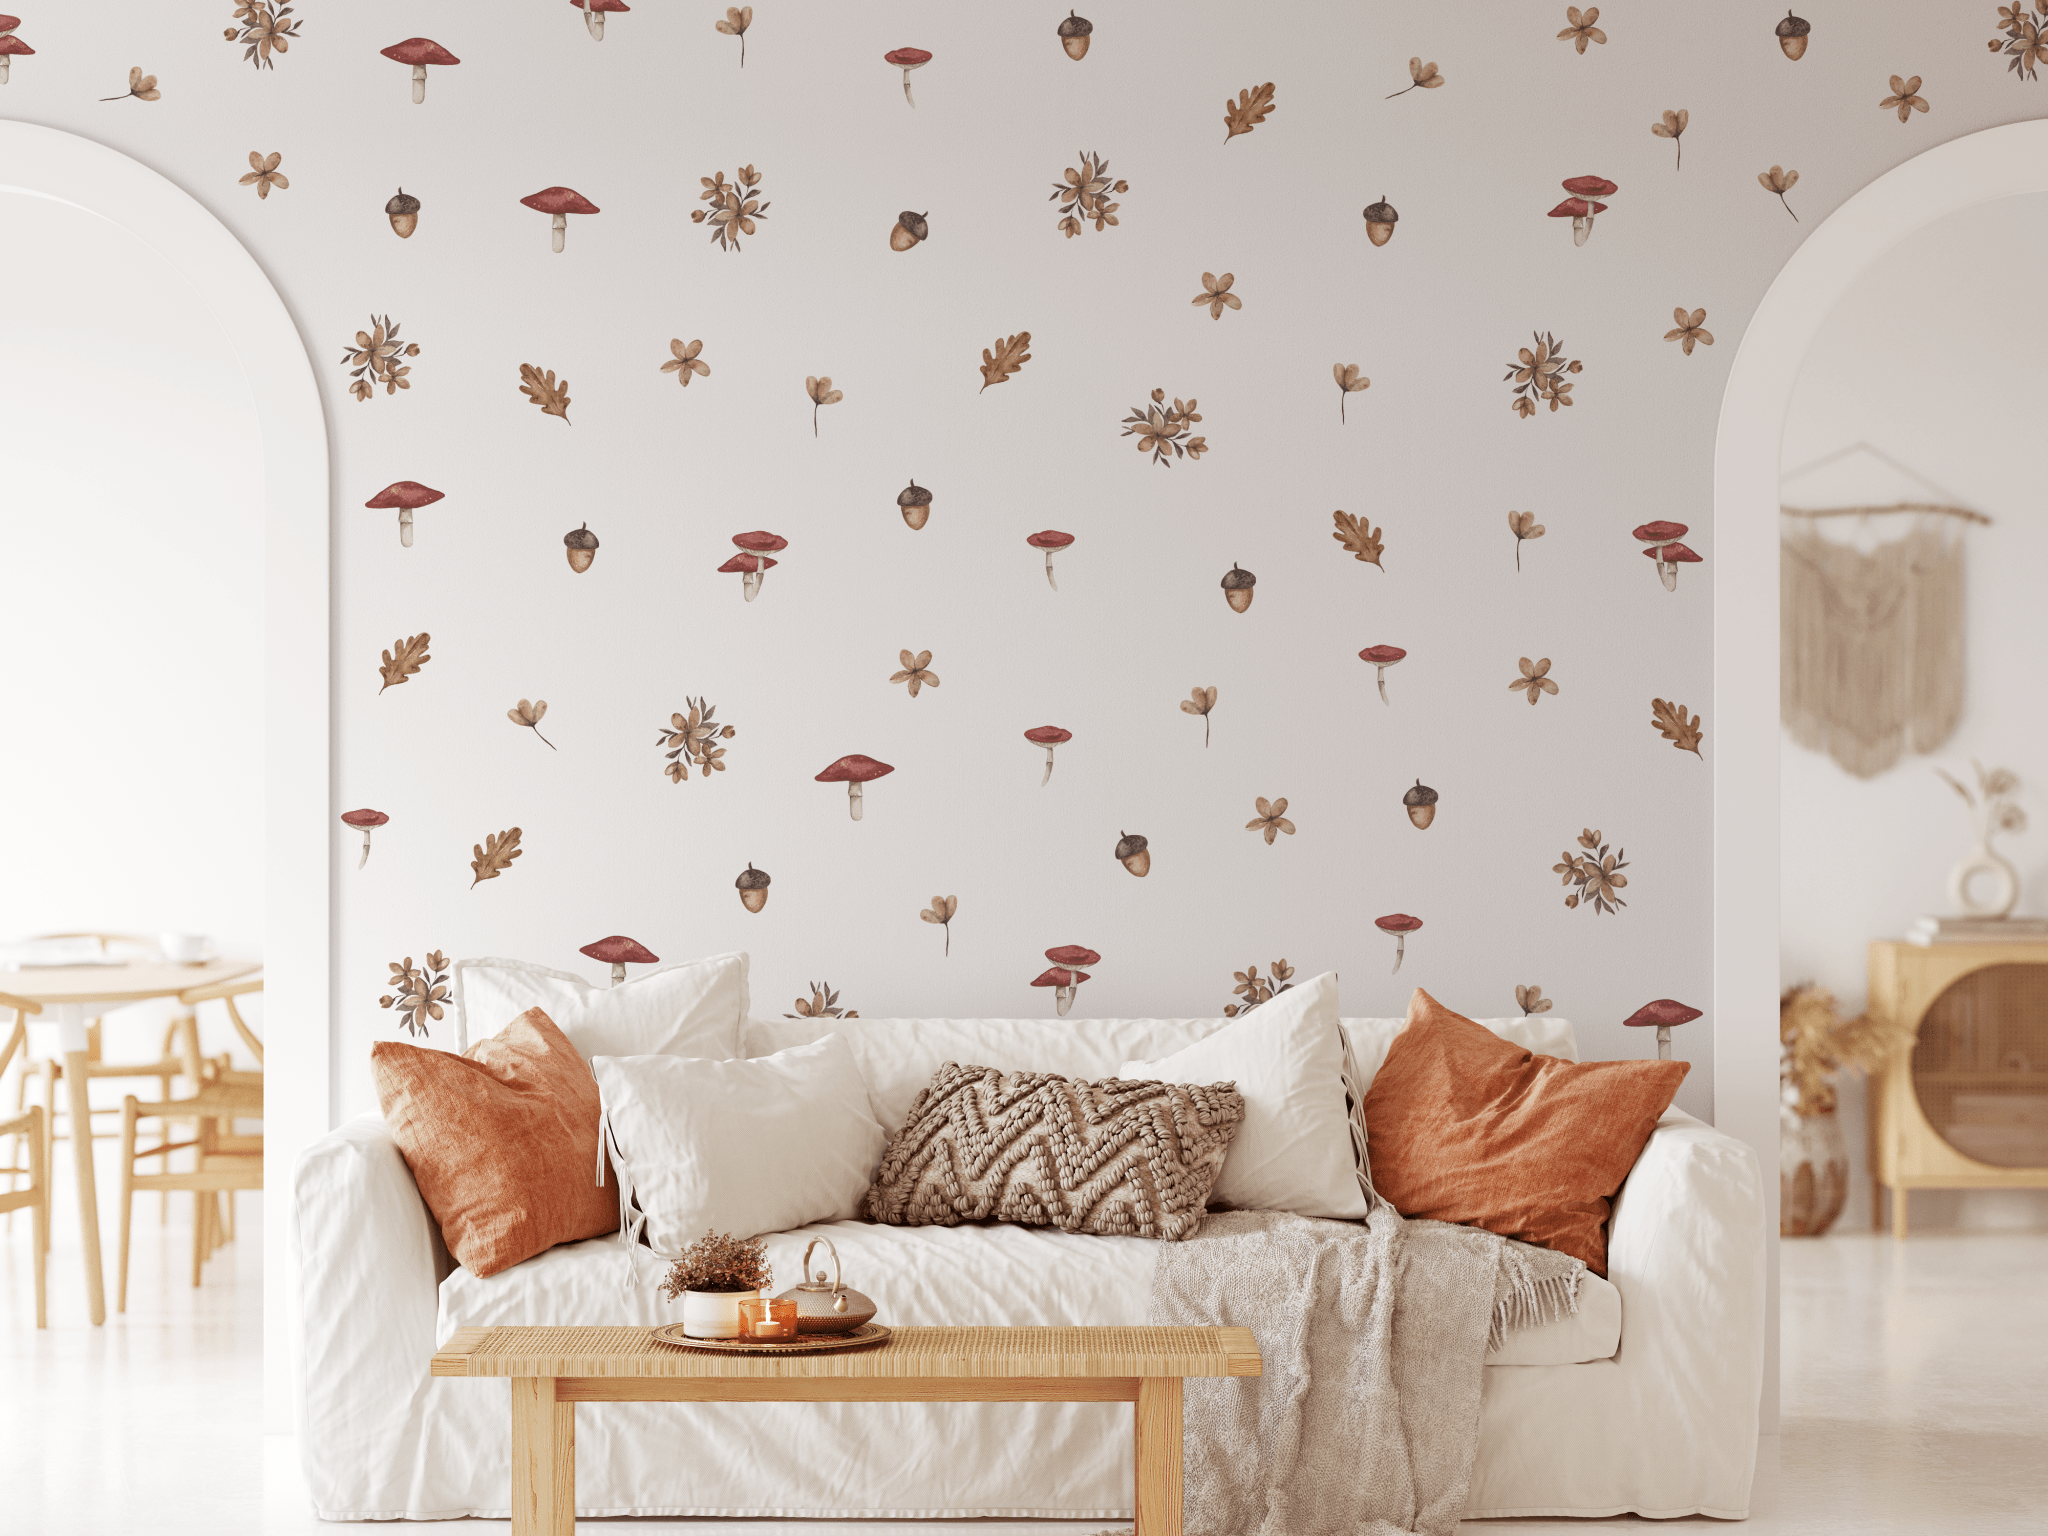 Removable peel and stick wall decals in a woodland forest theme featuring acorns, flowers, leaves and mushrooms